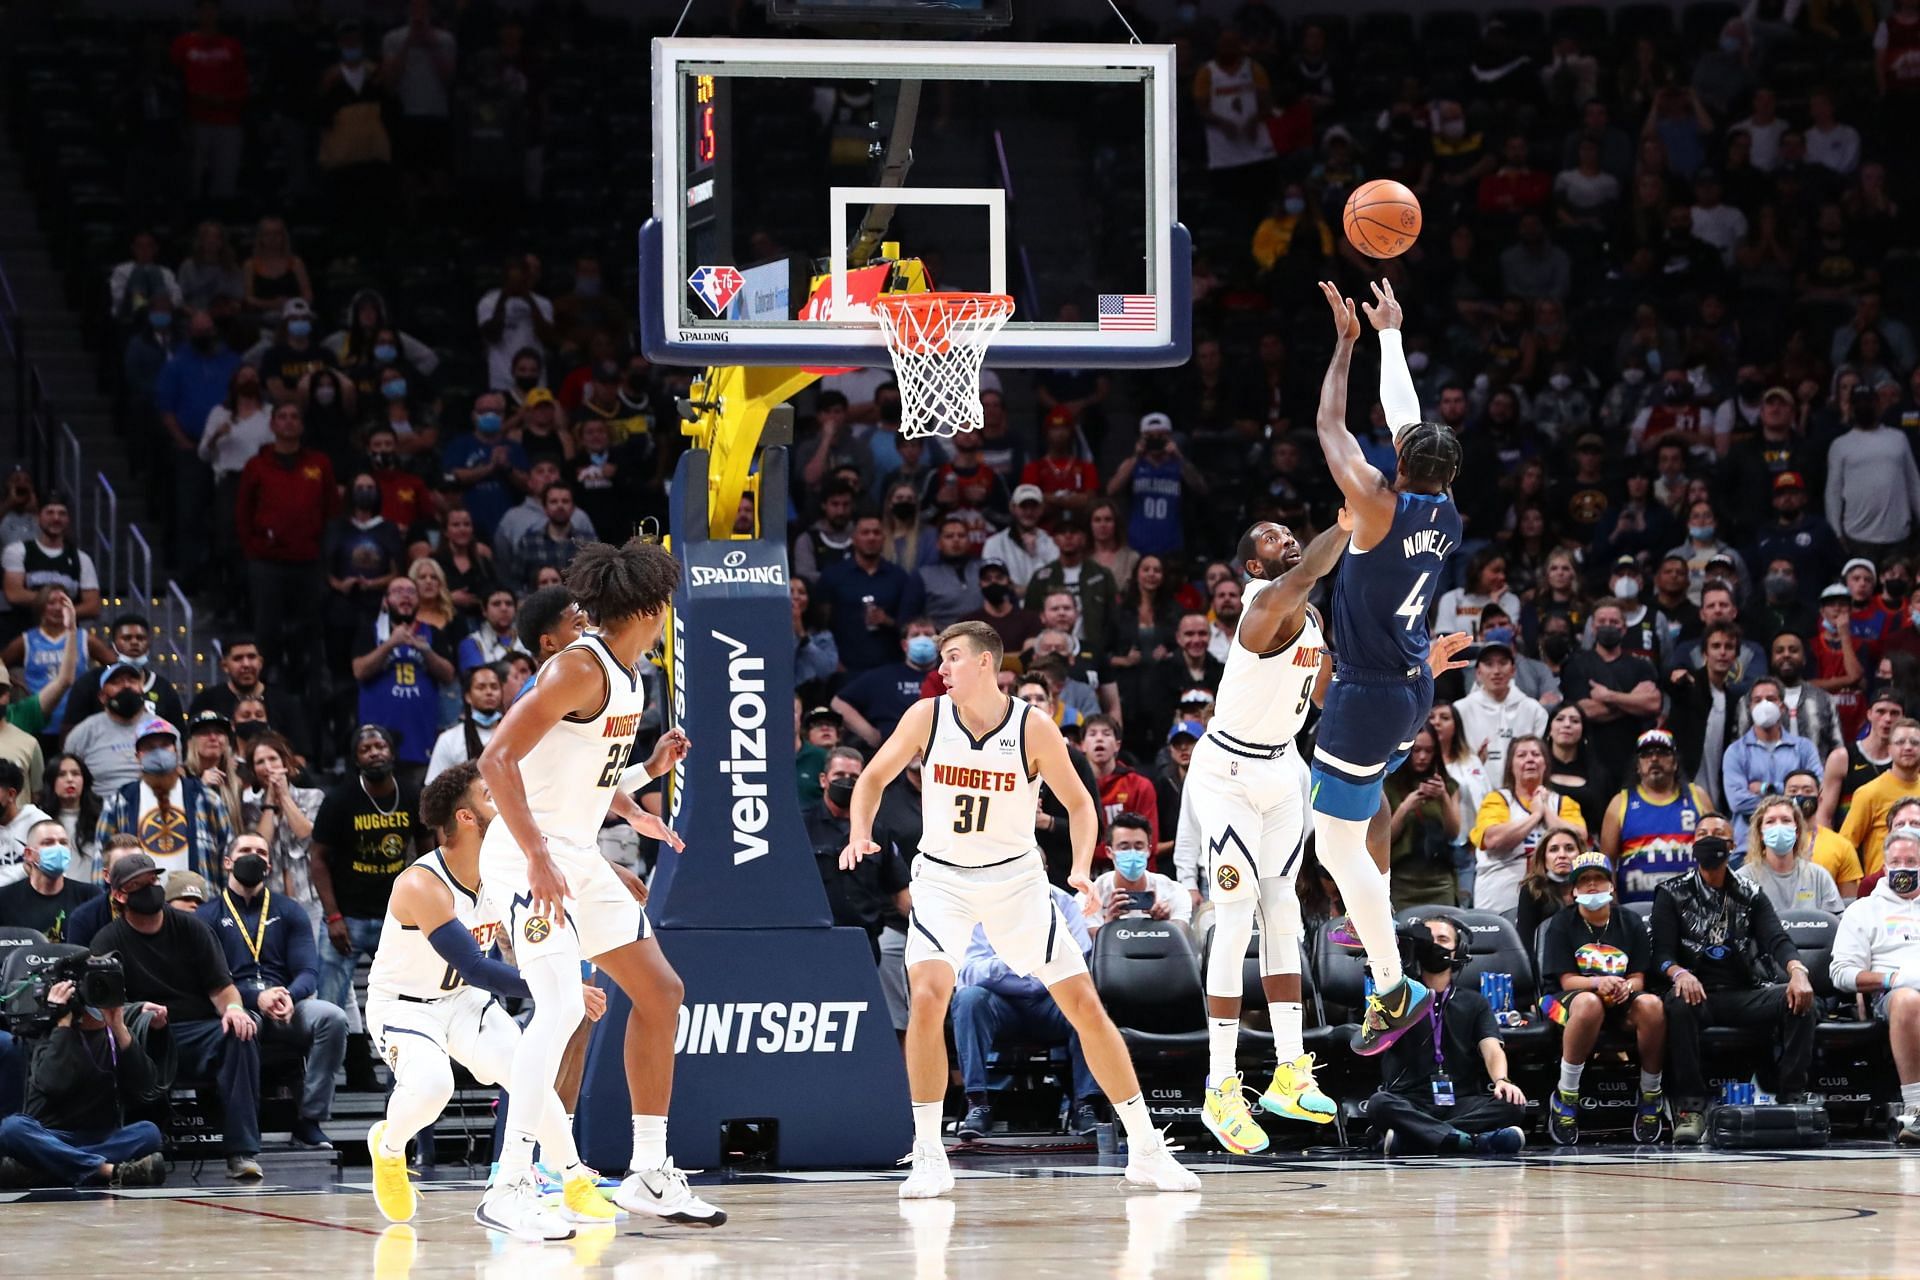 The Denver Nuggets will host the Minnesota Timberwolves on December 15th